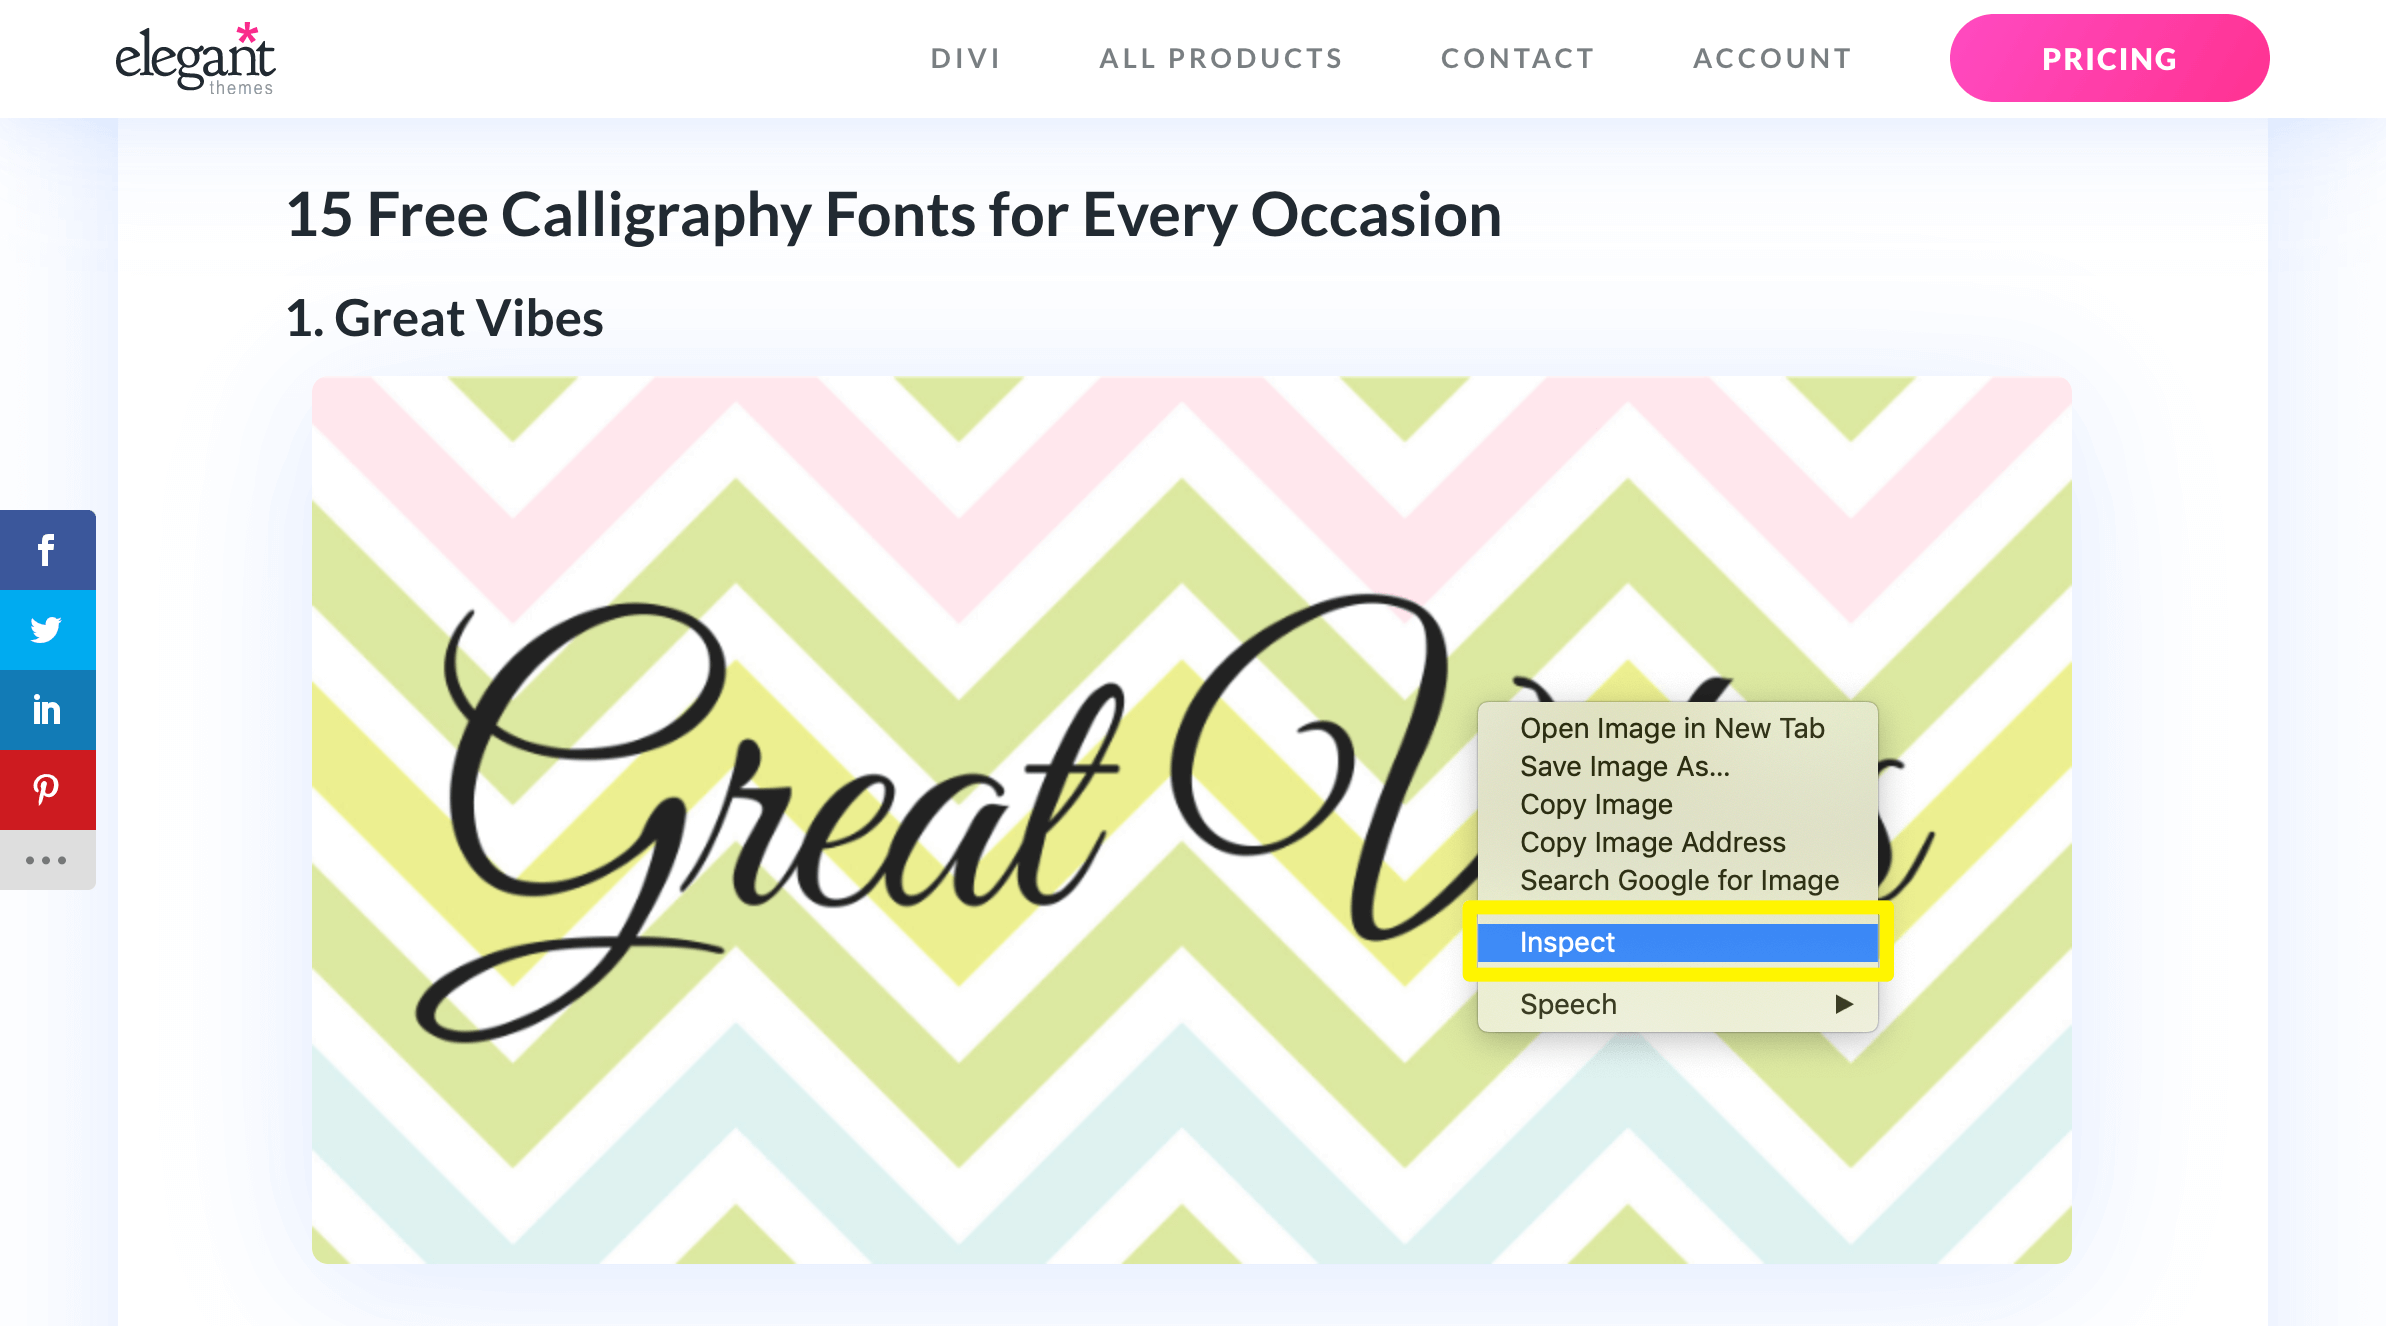 7 Best Font Finders by Image and URL